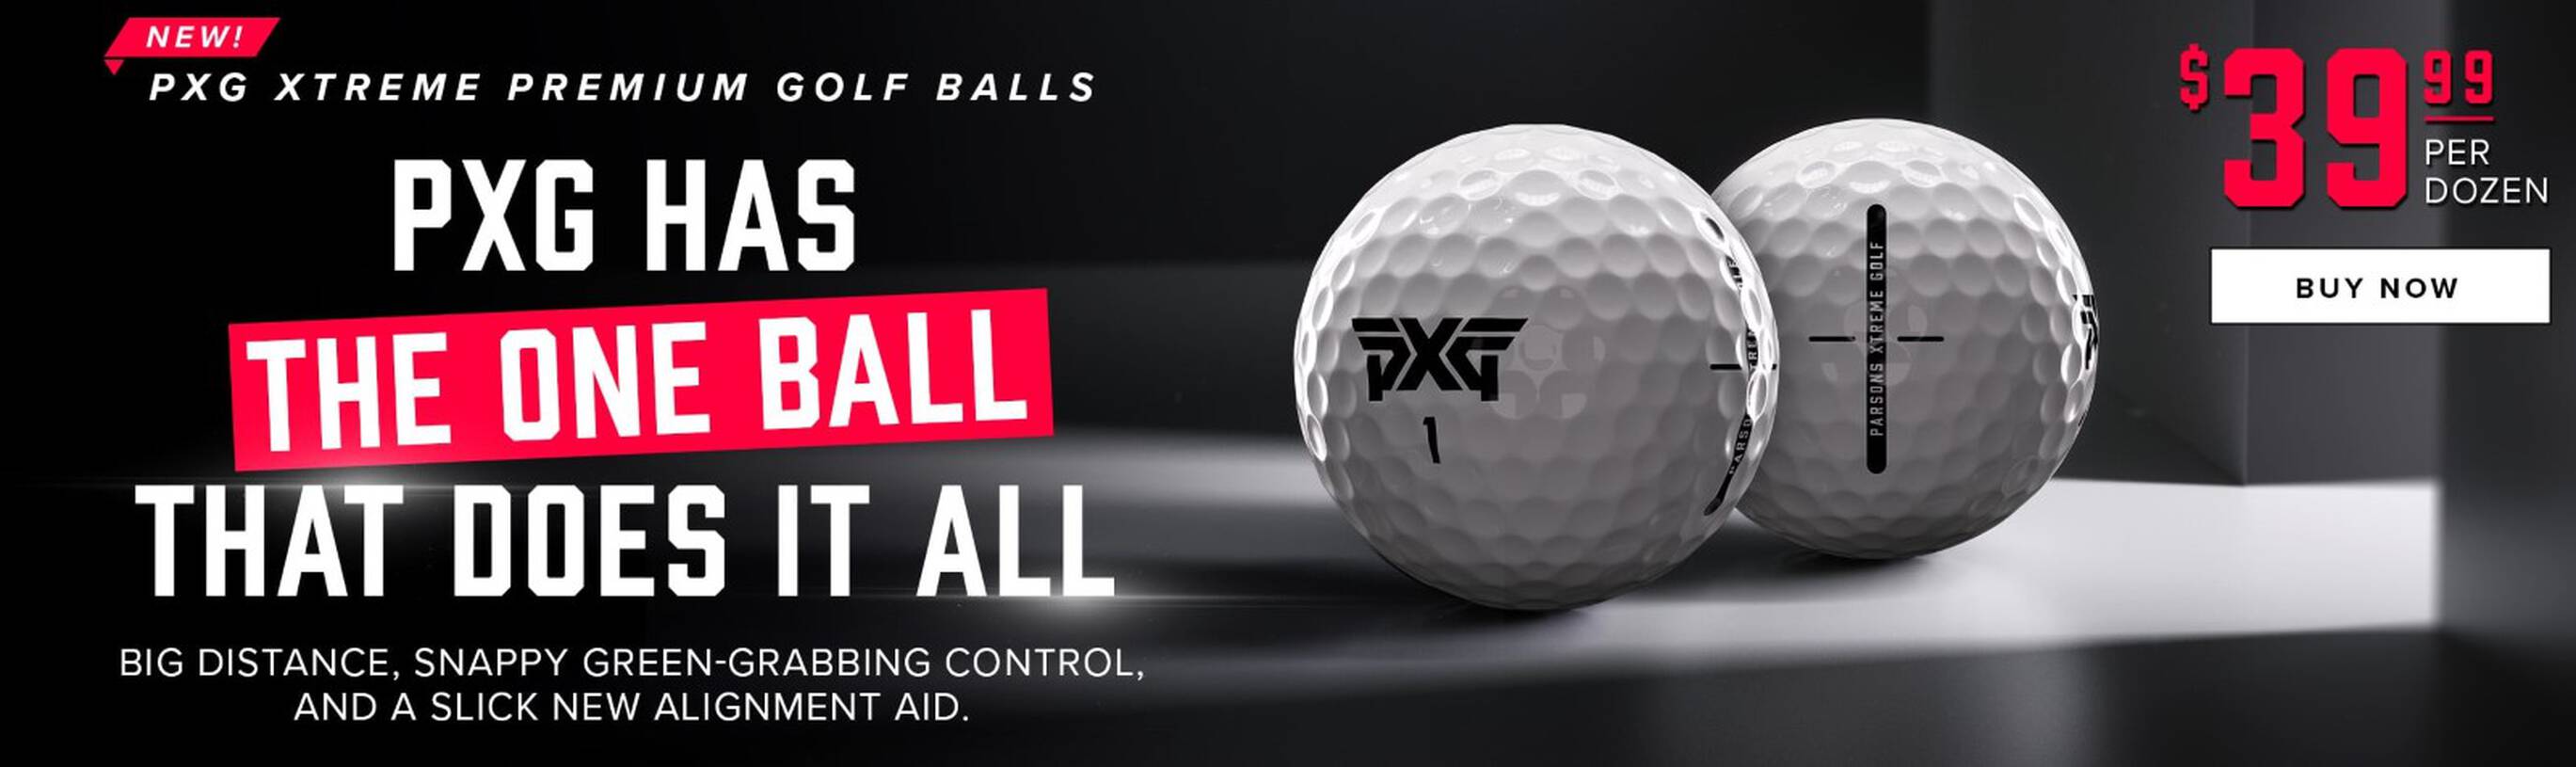 PXG HAS THE ONE BALL THAT DOES IT ALL